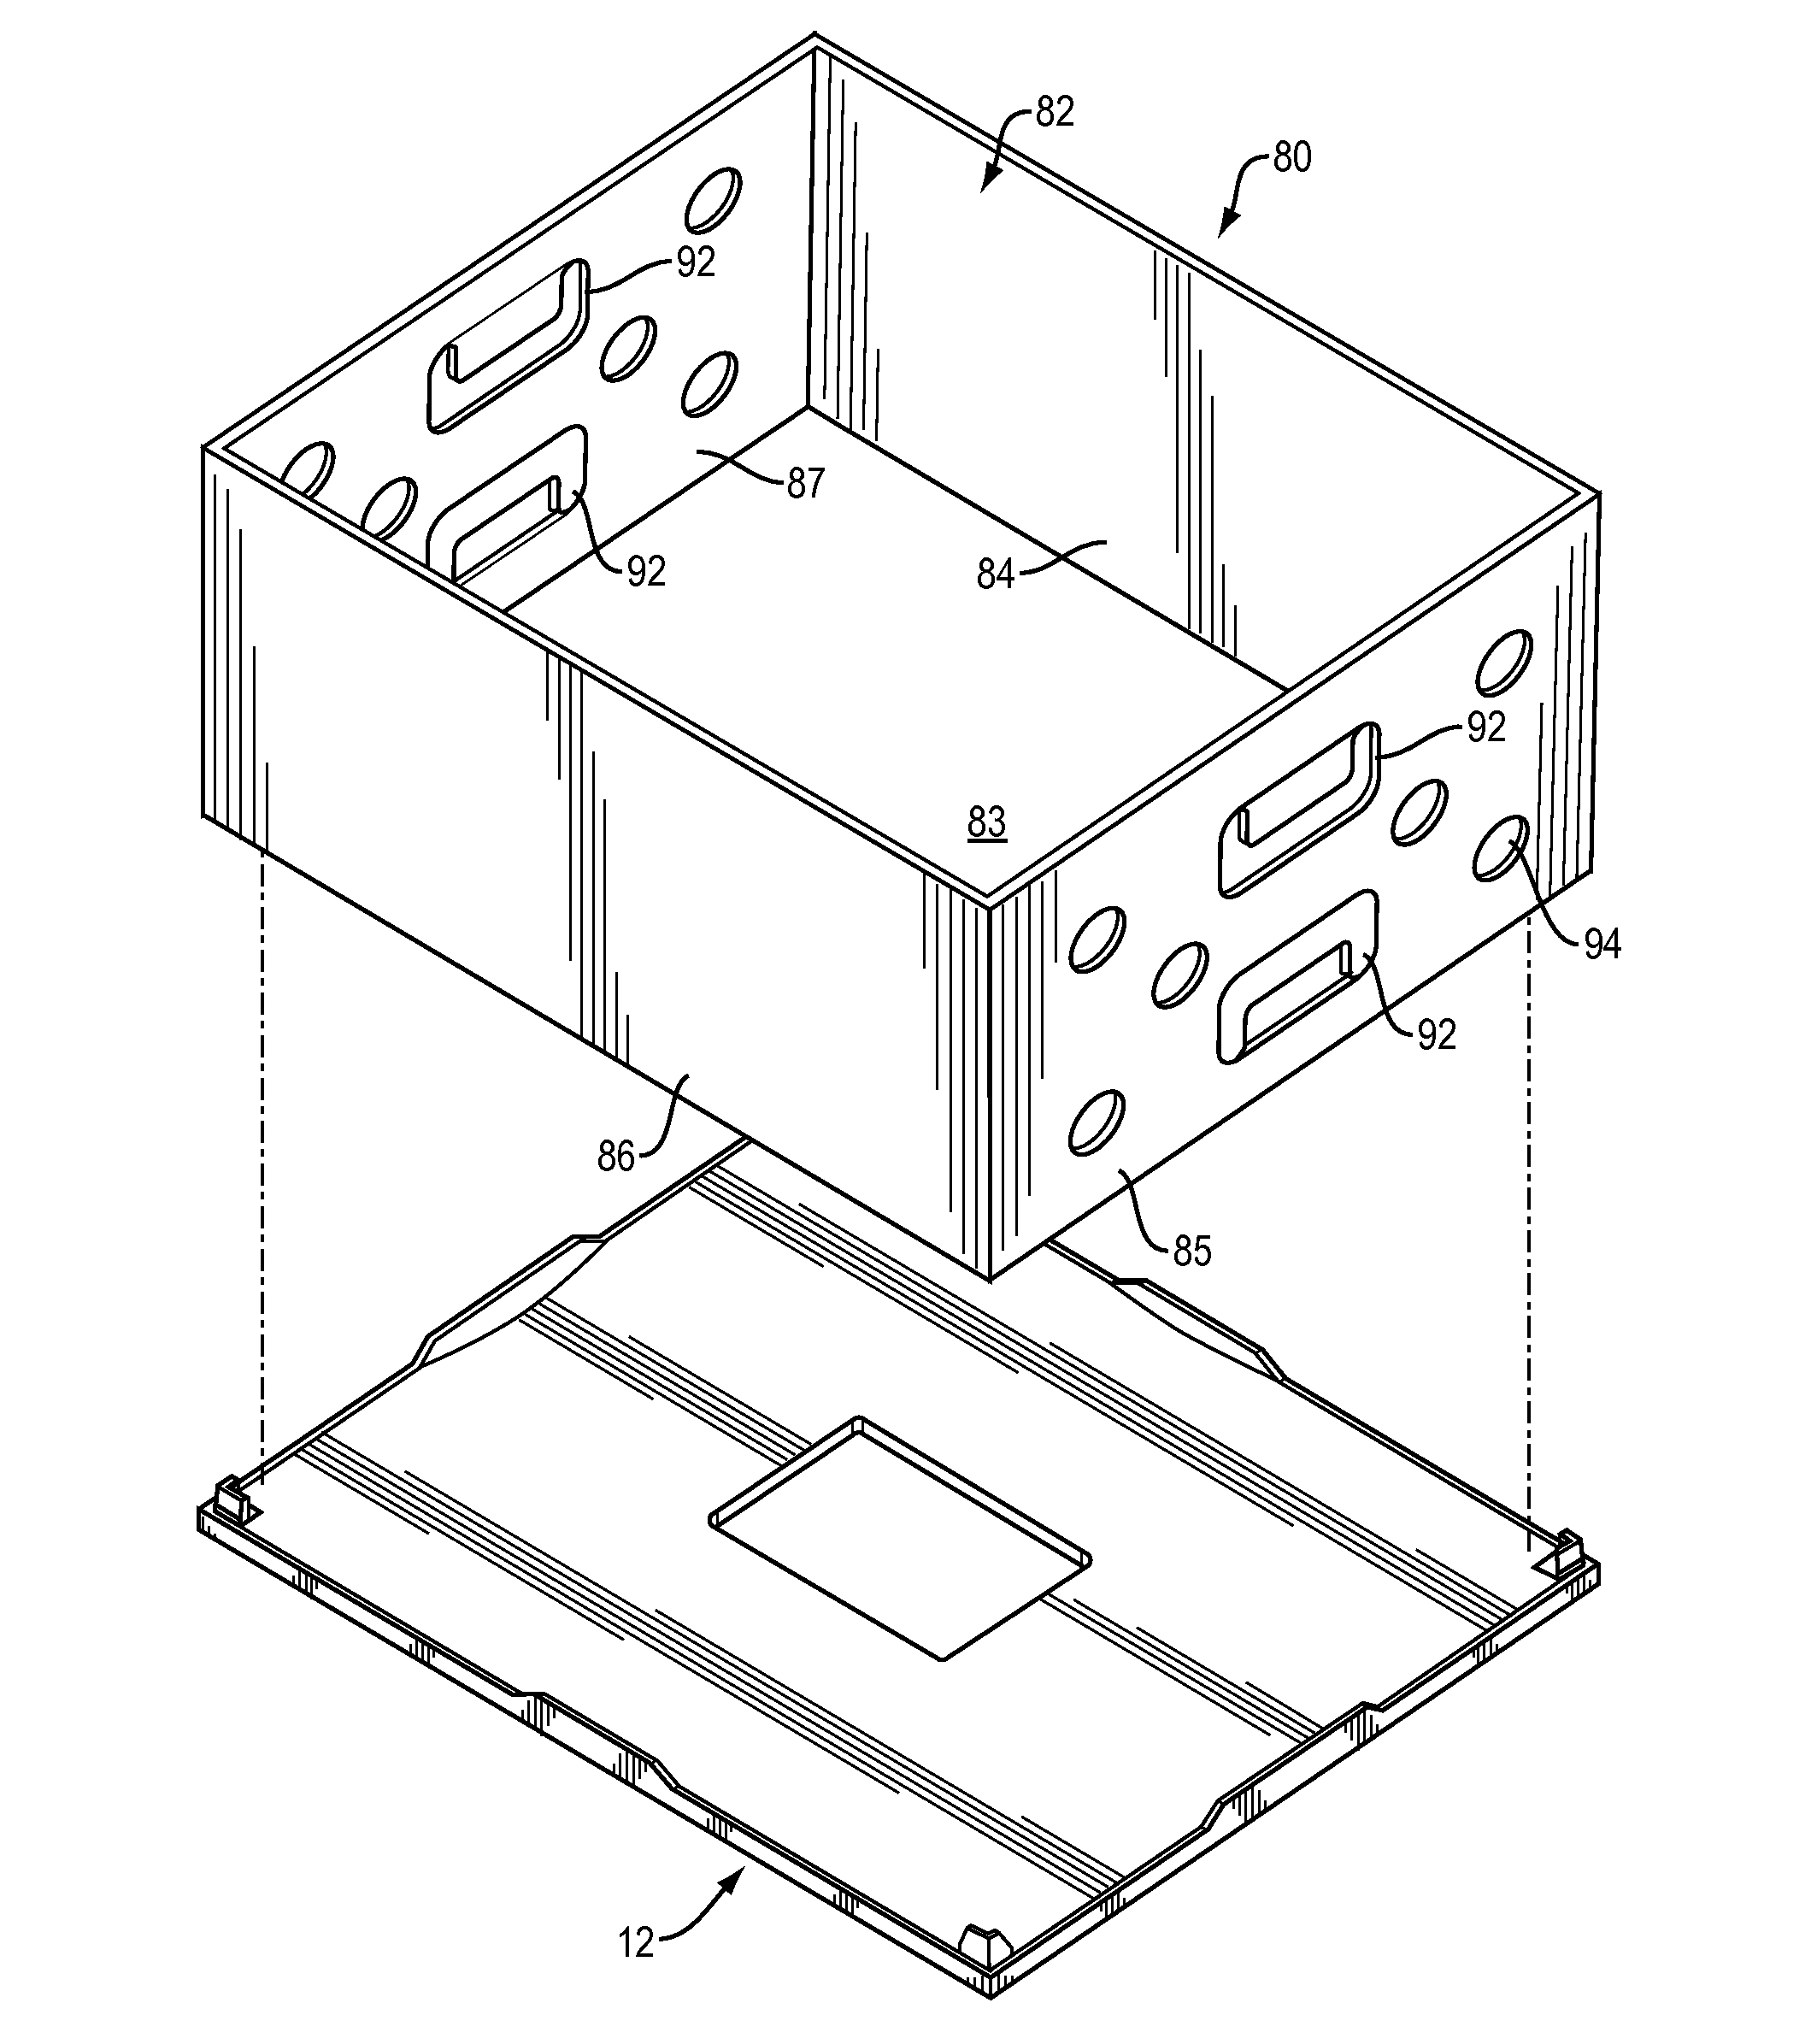 Reusable, combined multi-part product shipping box and display tray